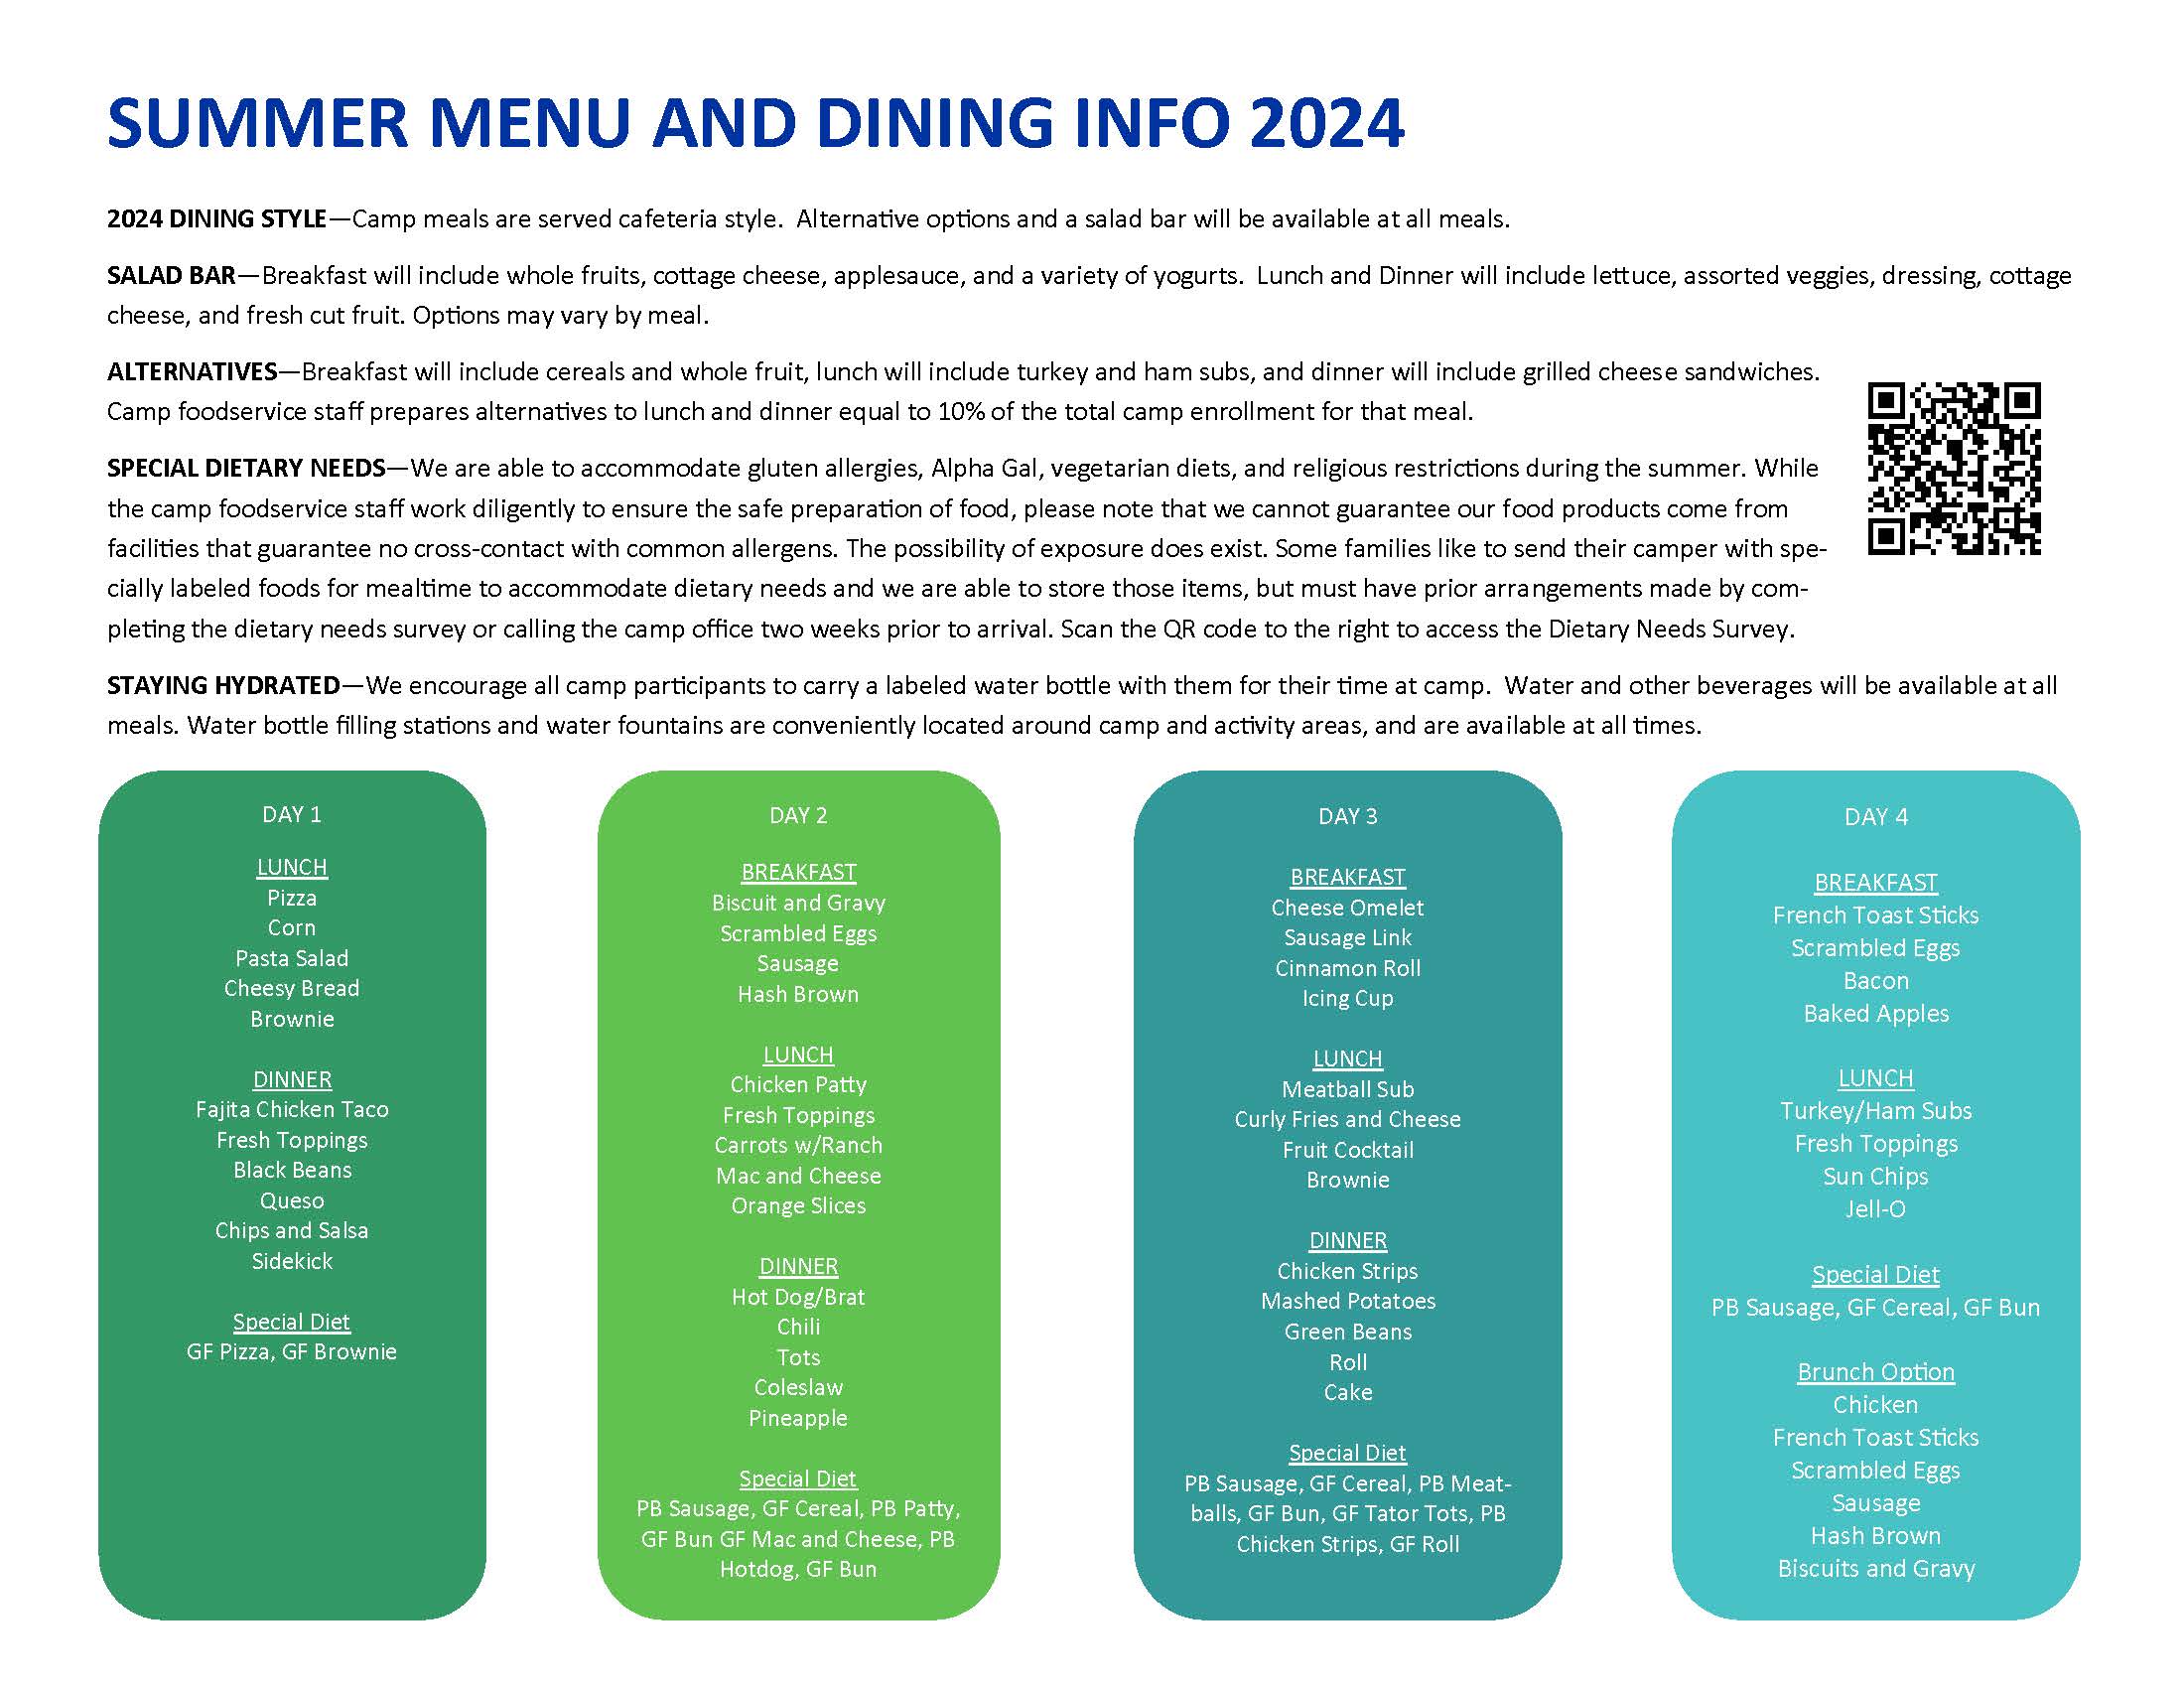 This is the menu used during weeks that come for four days during the summer.  